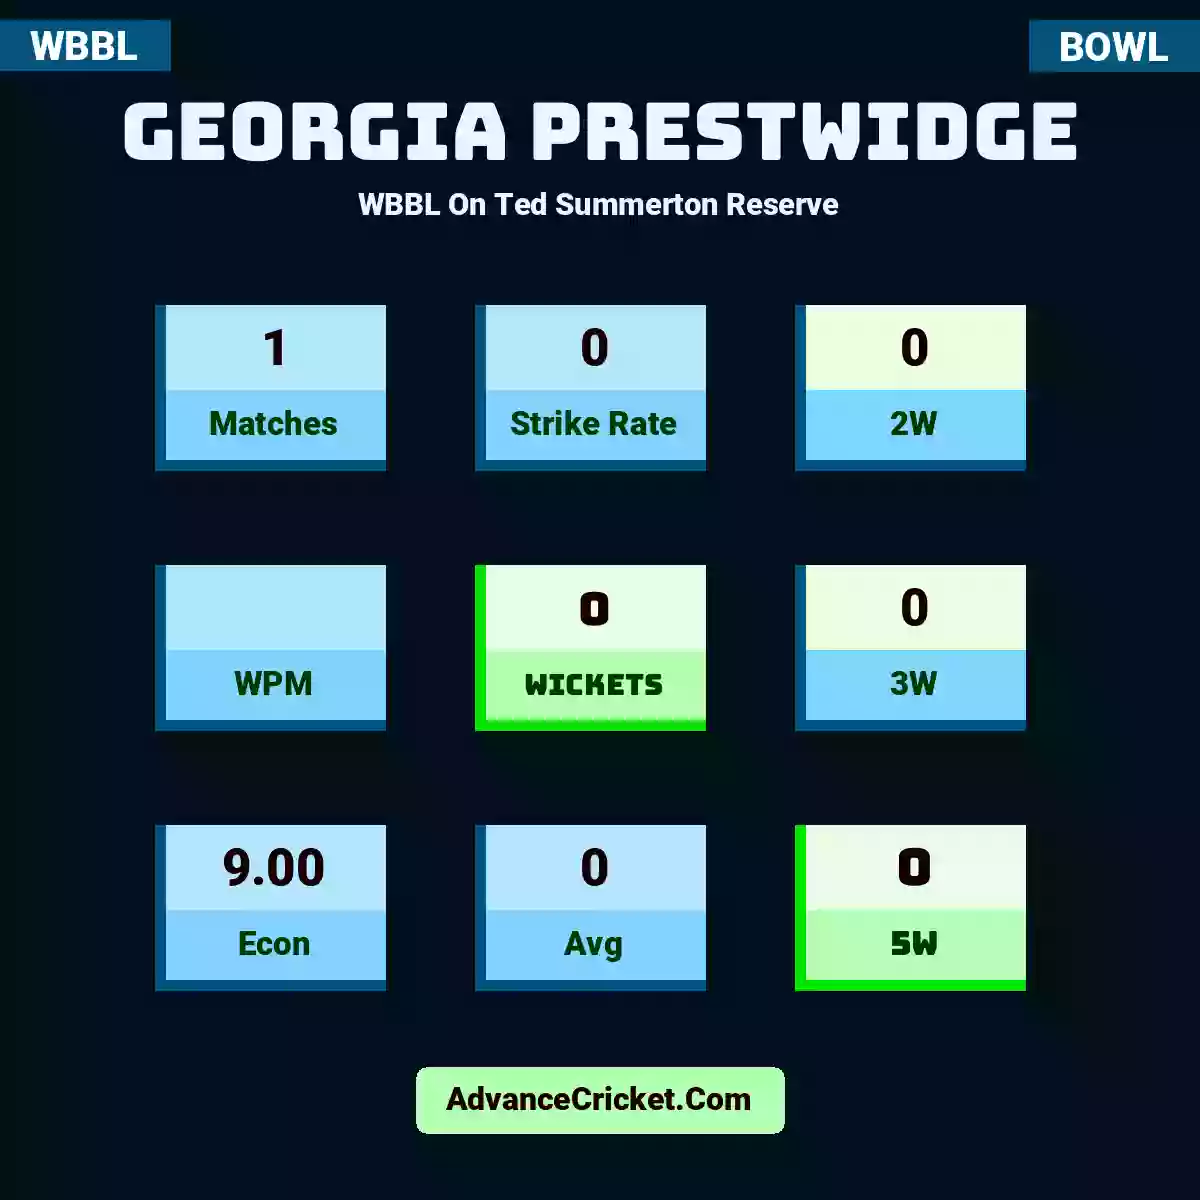 Georgia Prestwidge WBBL  On Ted Summerton Reserve, Georgia Prestwidge played 1 match in this WBBL mode, with a SR of 0. G.Prestwidge took 0 2W, with a WPM of . Georgia Prestwidge secured 0 wickets, including 0 3W hauls, with an Econ of 9.00 and Avg of 0. Additionally, G.Prestwidge achieved 0 5W haul